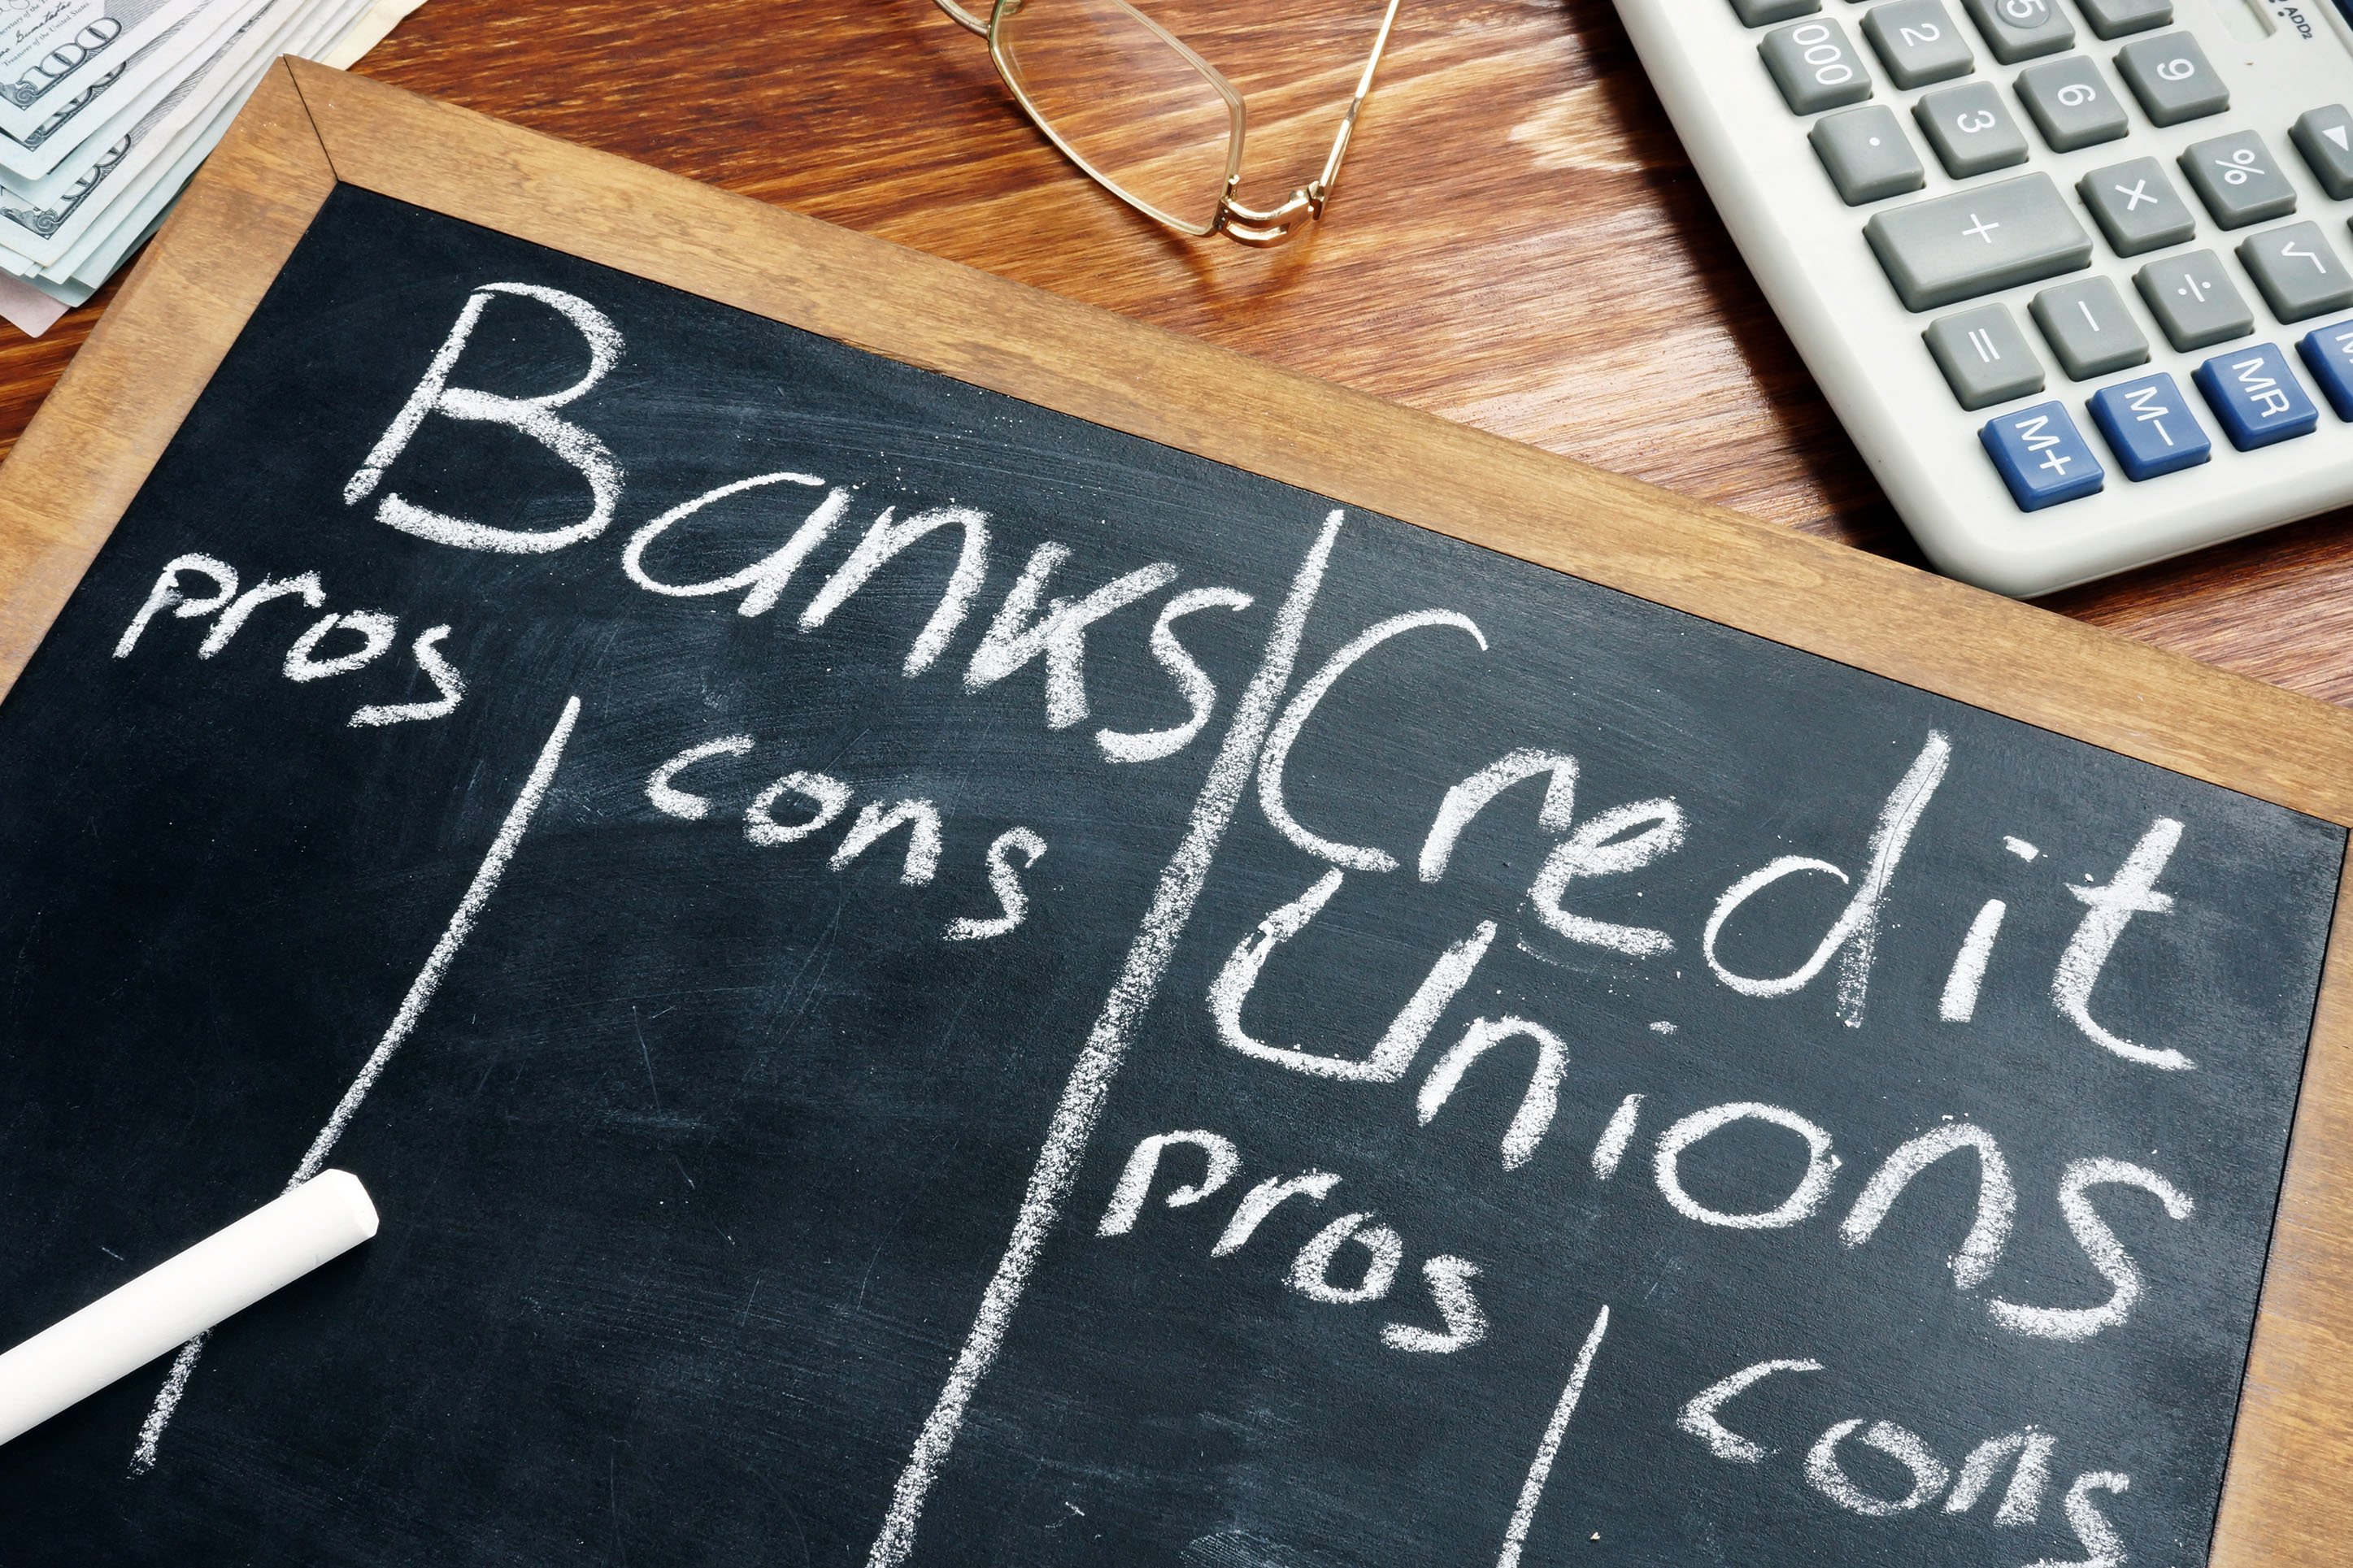 Image listing the pros and cons of credit unions